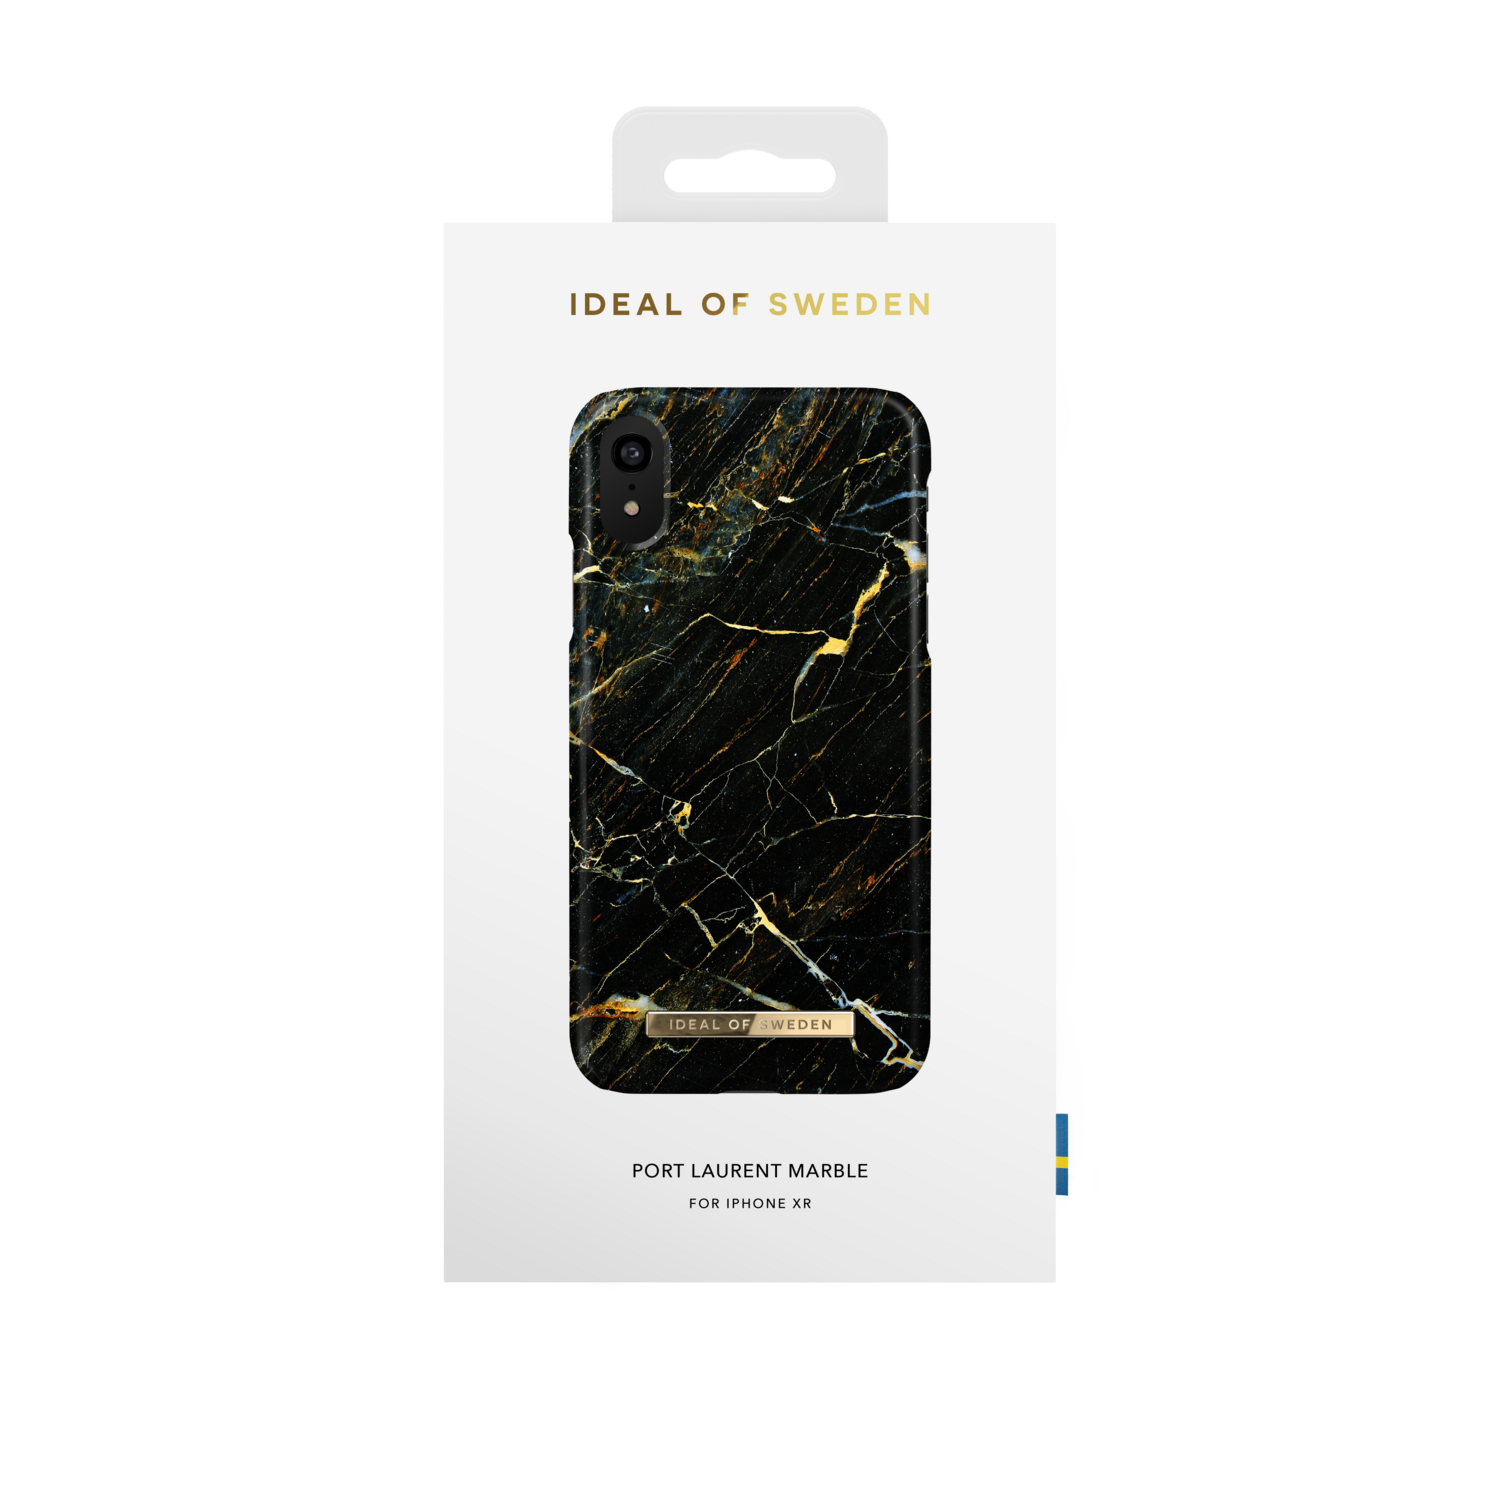 iDeal Of Sweden iPhone XR Fashion Case A/W 16-17, Port Laurent Marble